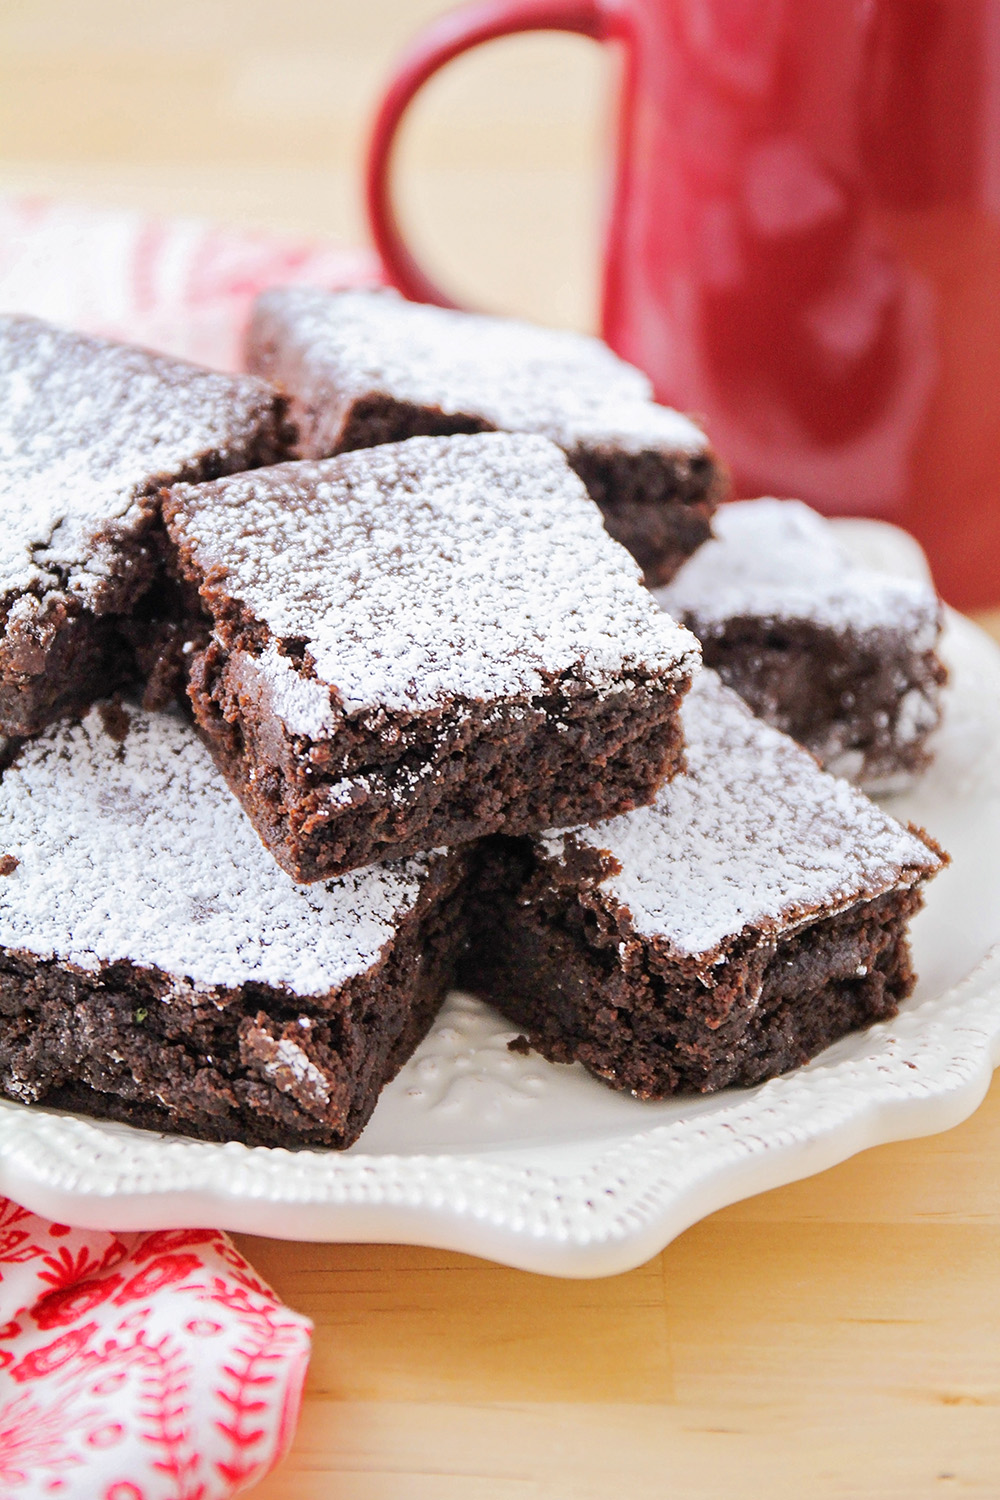 These fudgy chocolate gingerbread brownies are so delicious! The combination of dark chocolate with a hint of spice makes these brownies unforgettable!